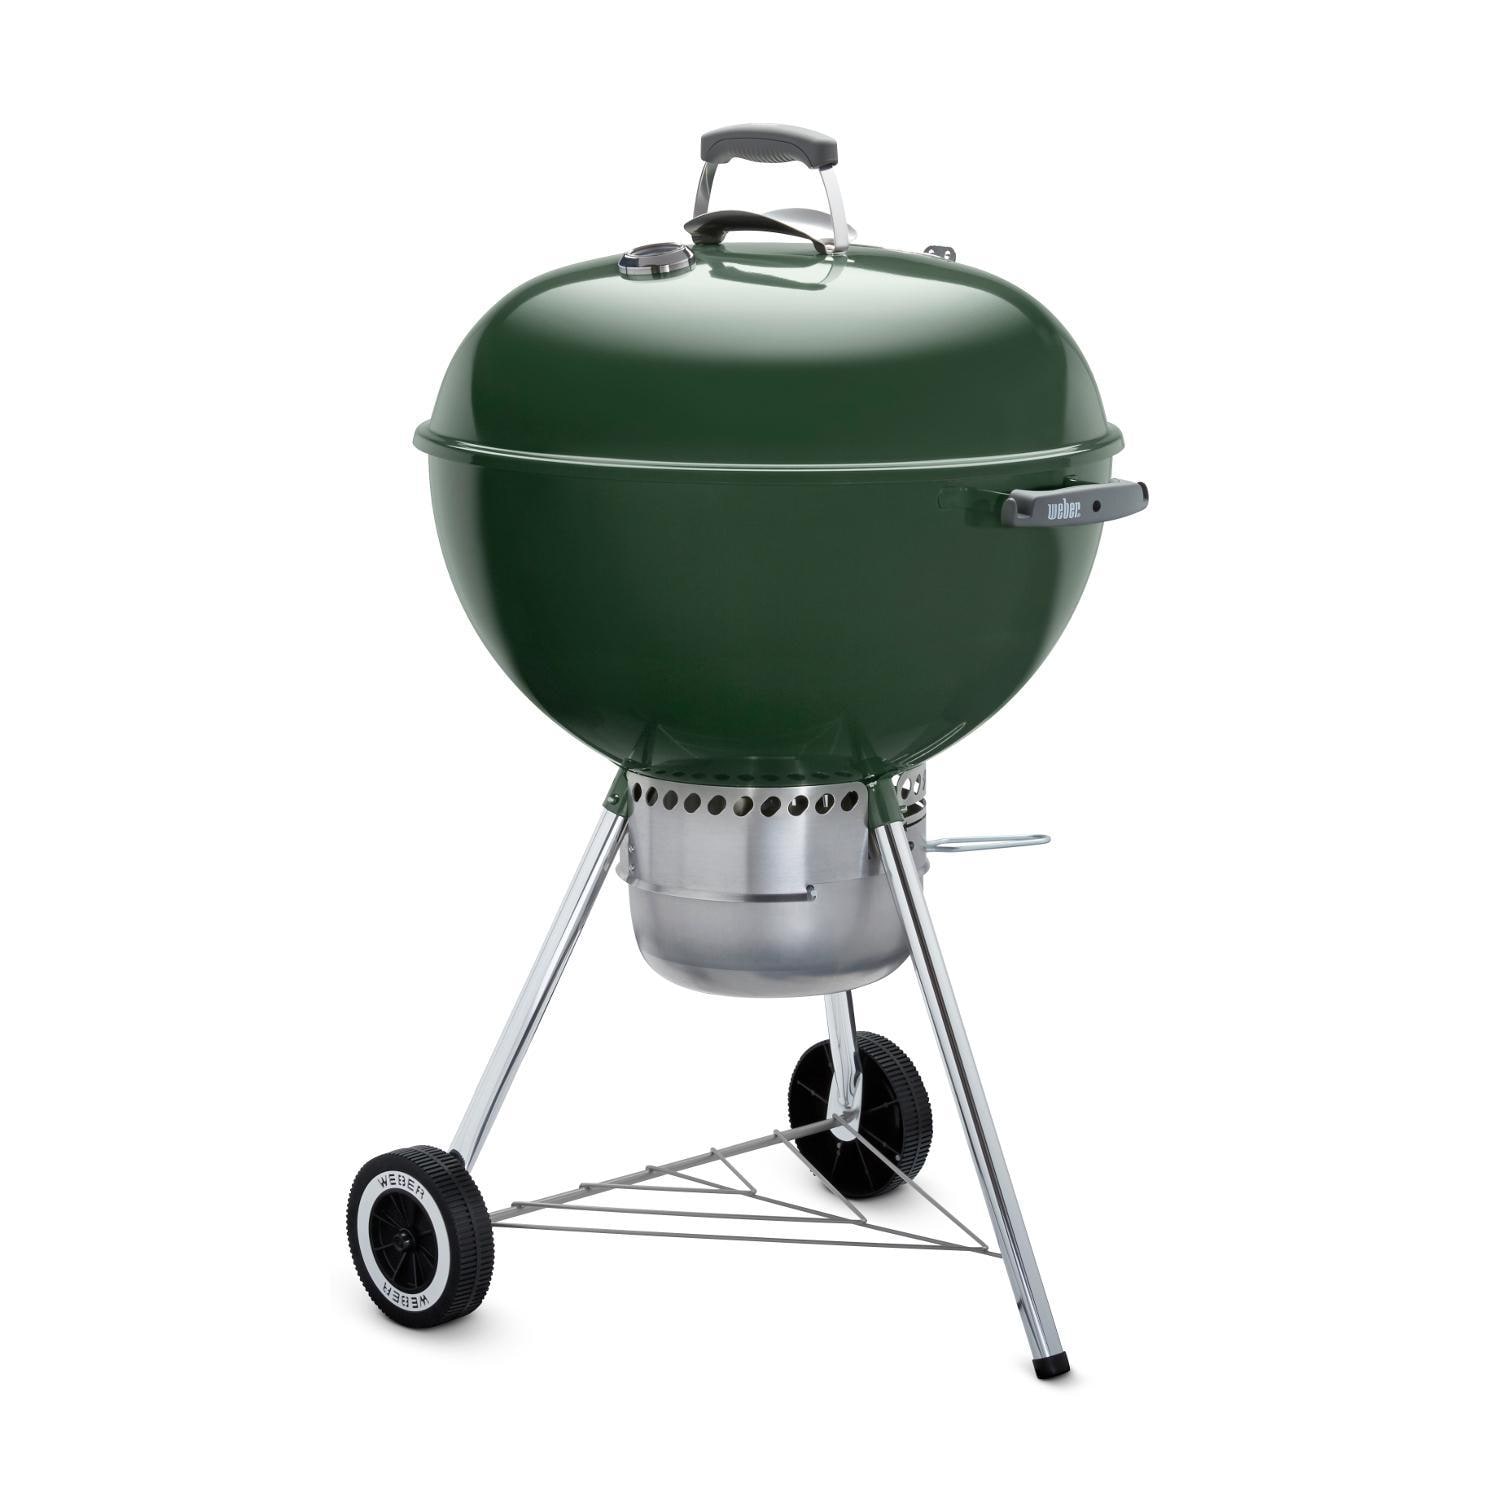 Weber Original Kettle Premium 22-Inch Charcoal Grill - Green - 14407001 - image 3 of 6